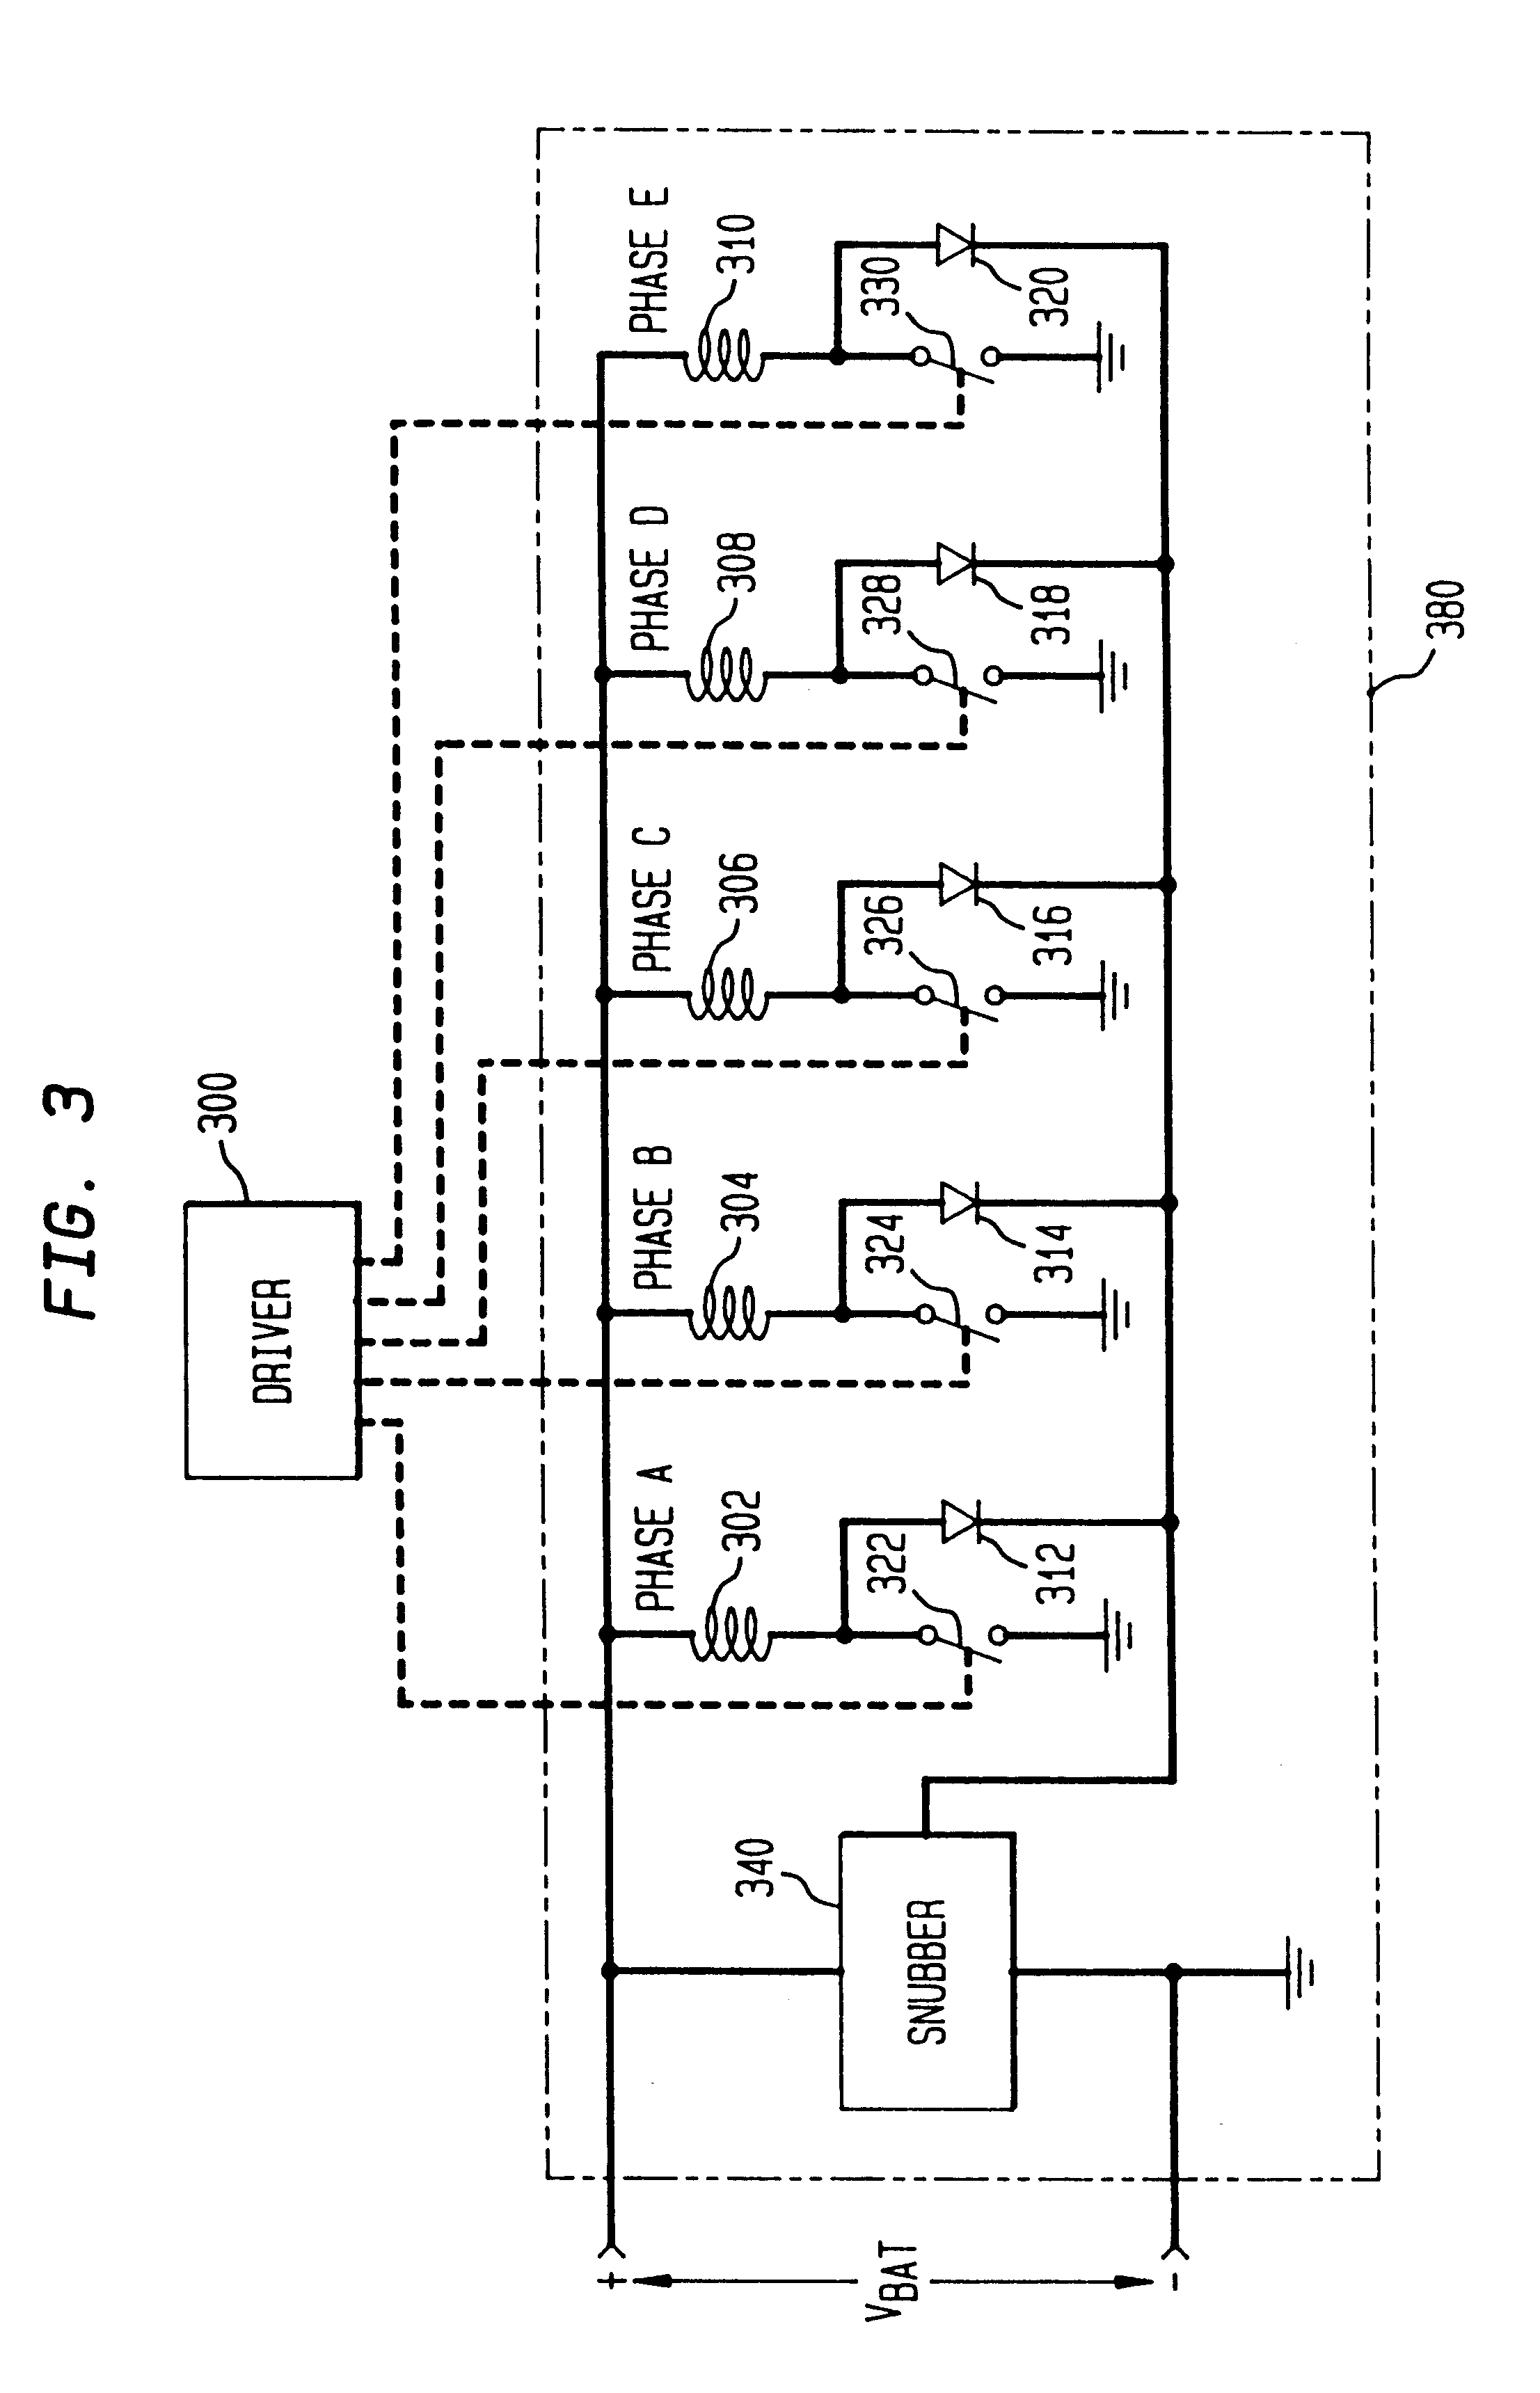 Staggered pulse width modulation apparatus and method for EMI minimization in motor